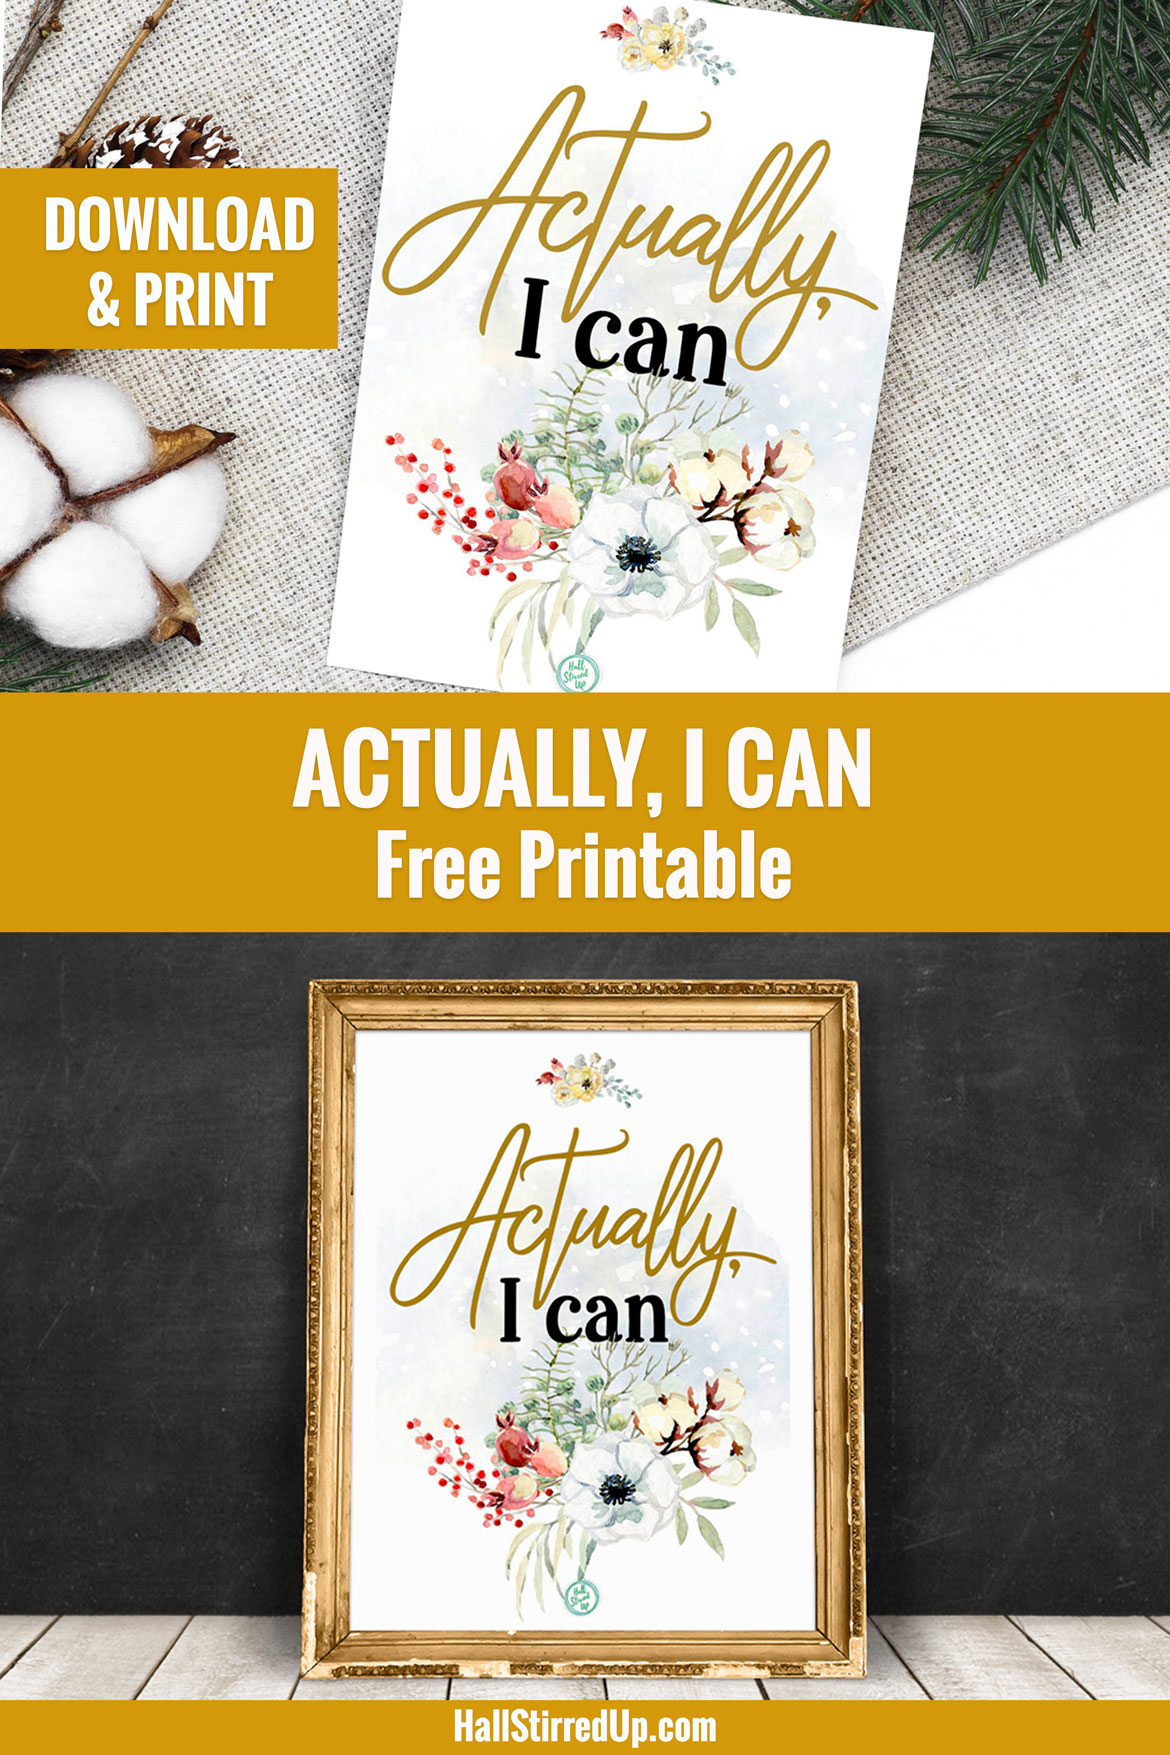 Stay motivated to meet your goals - includes printable